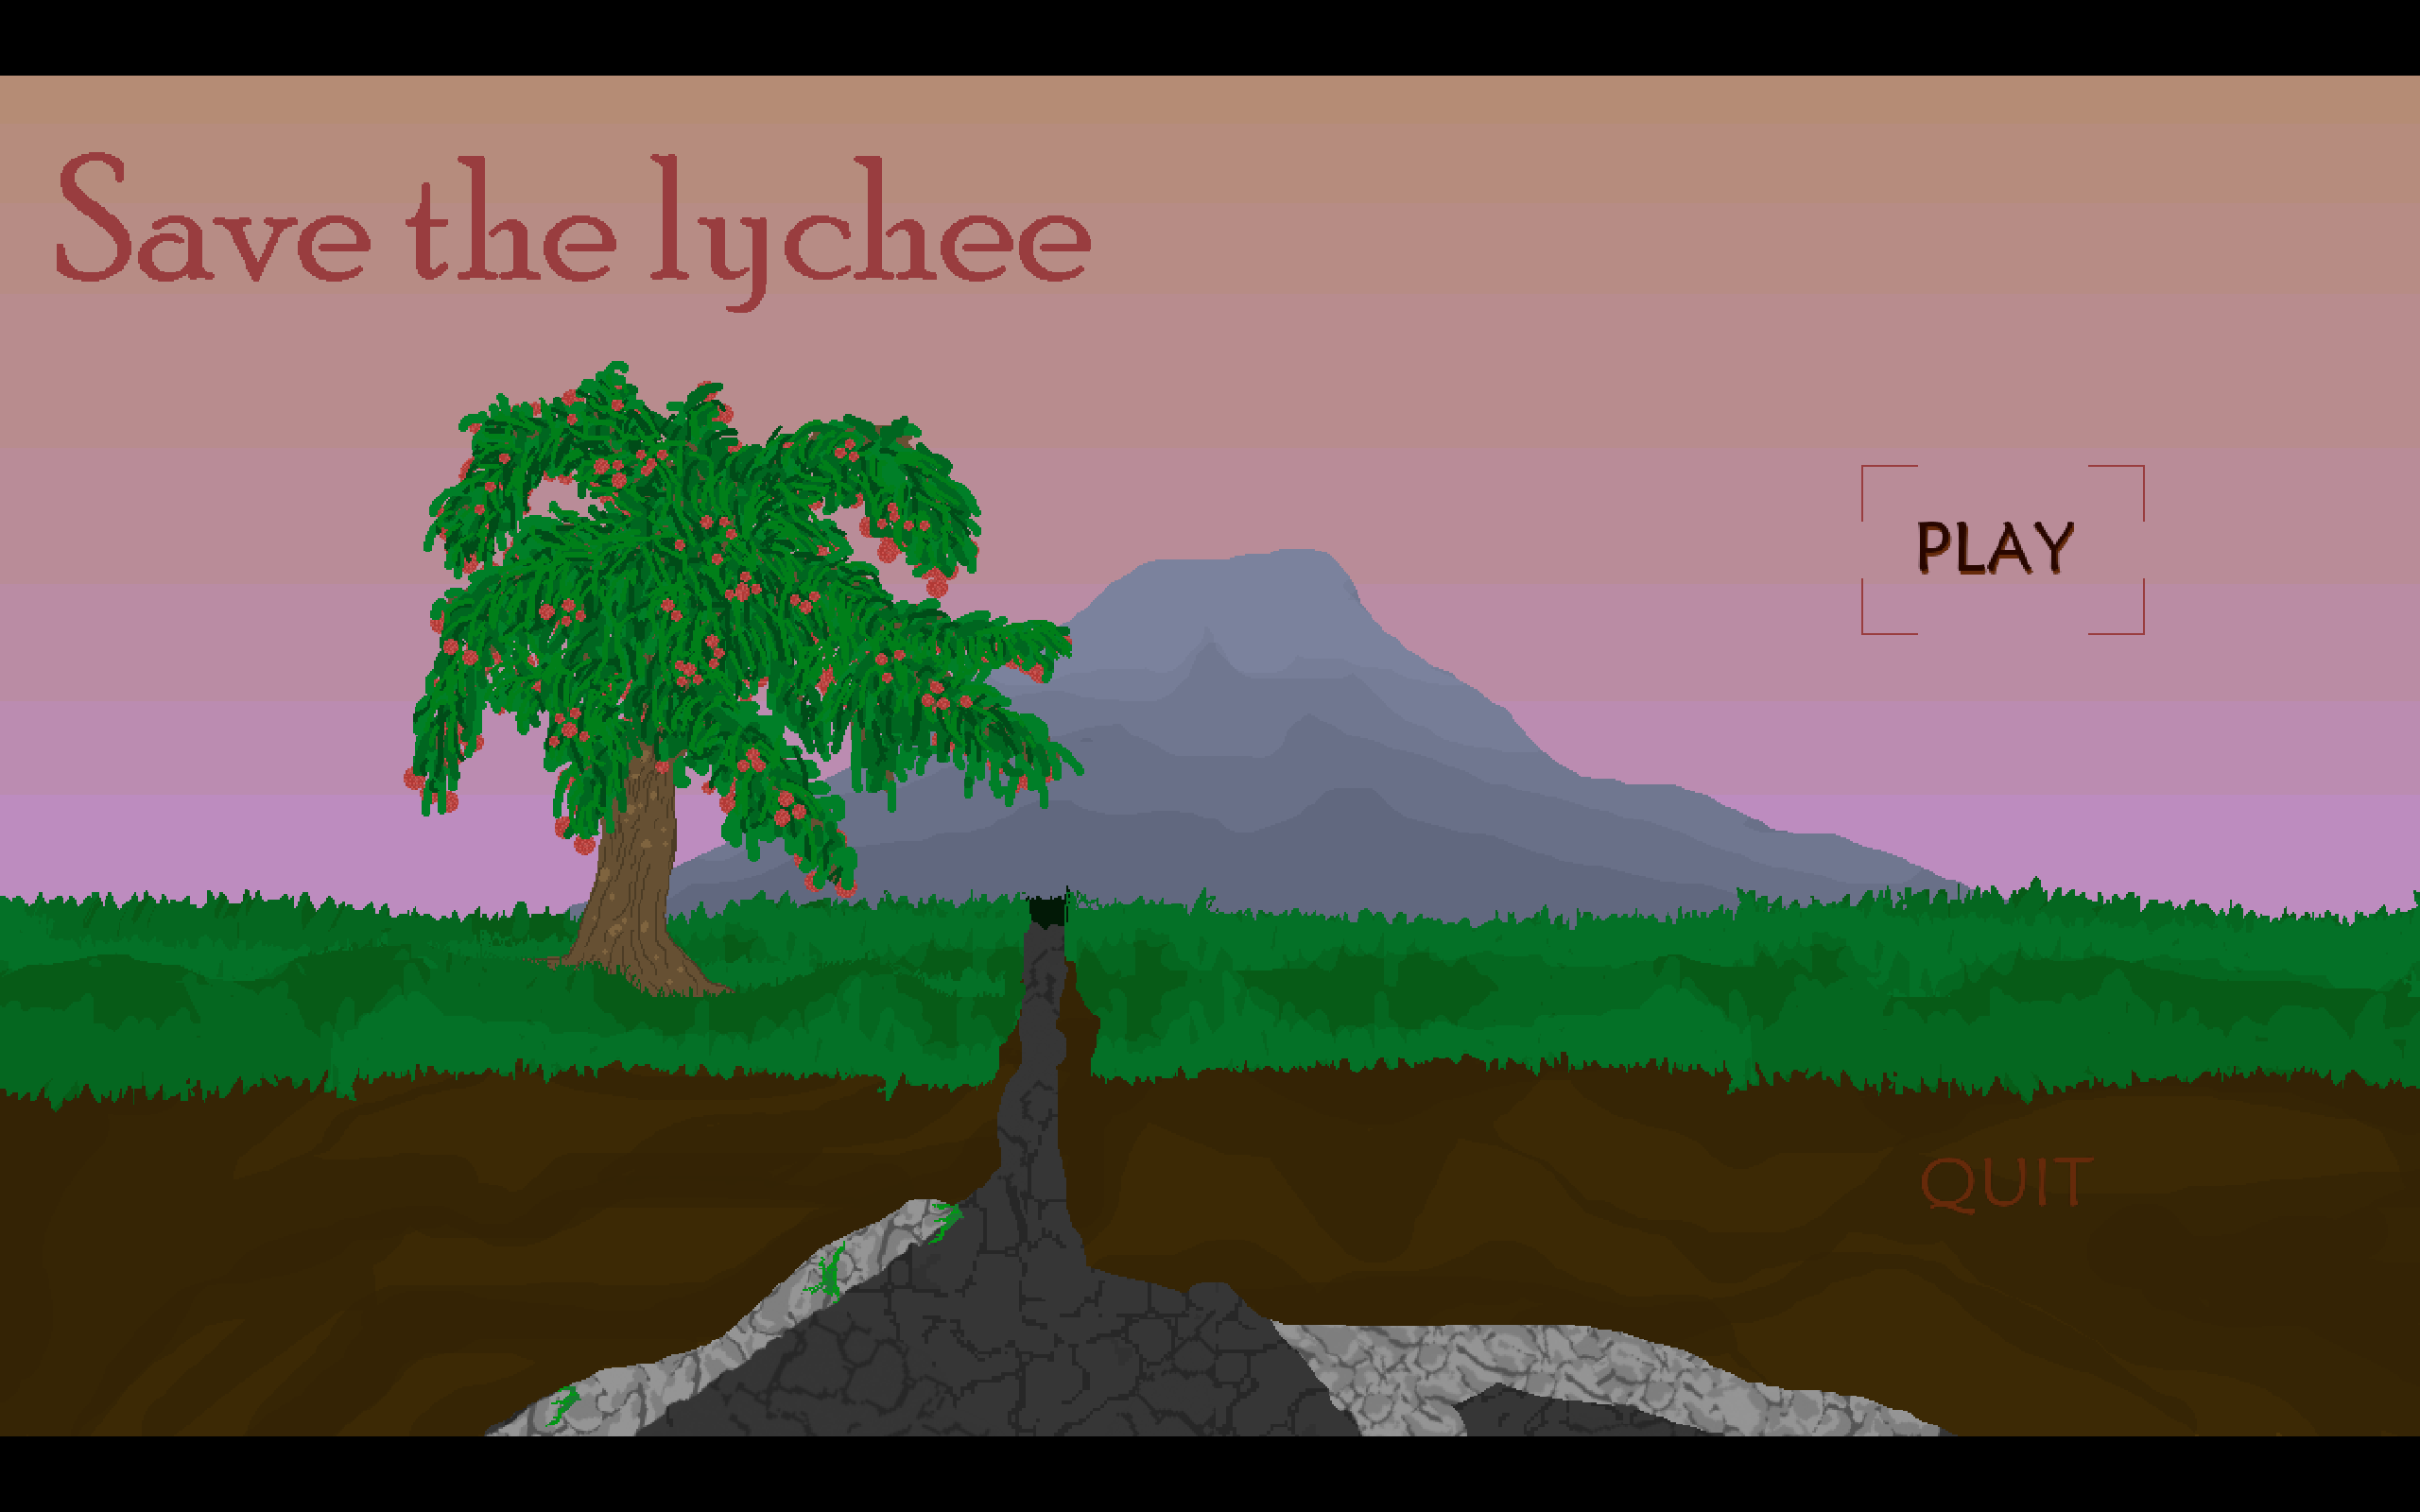 Save the lychee